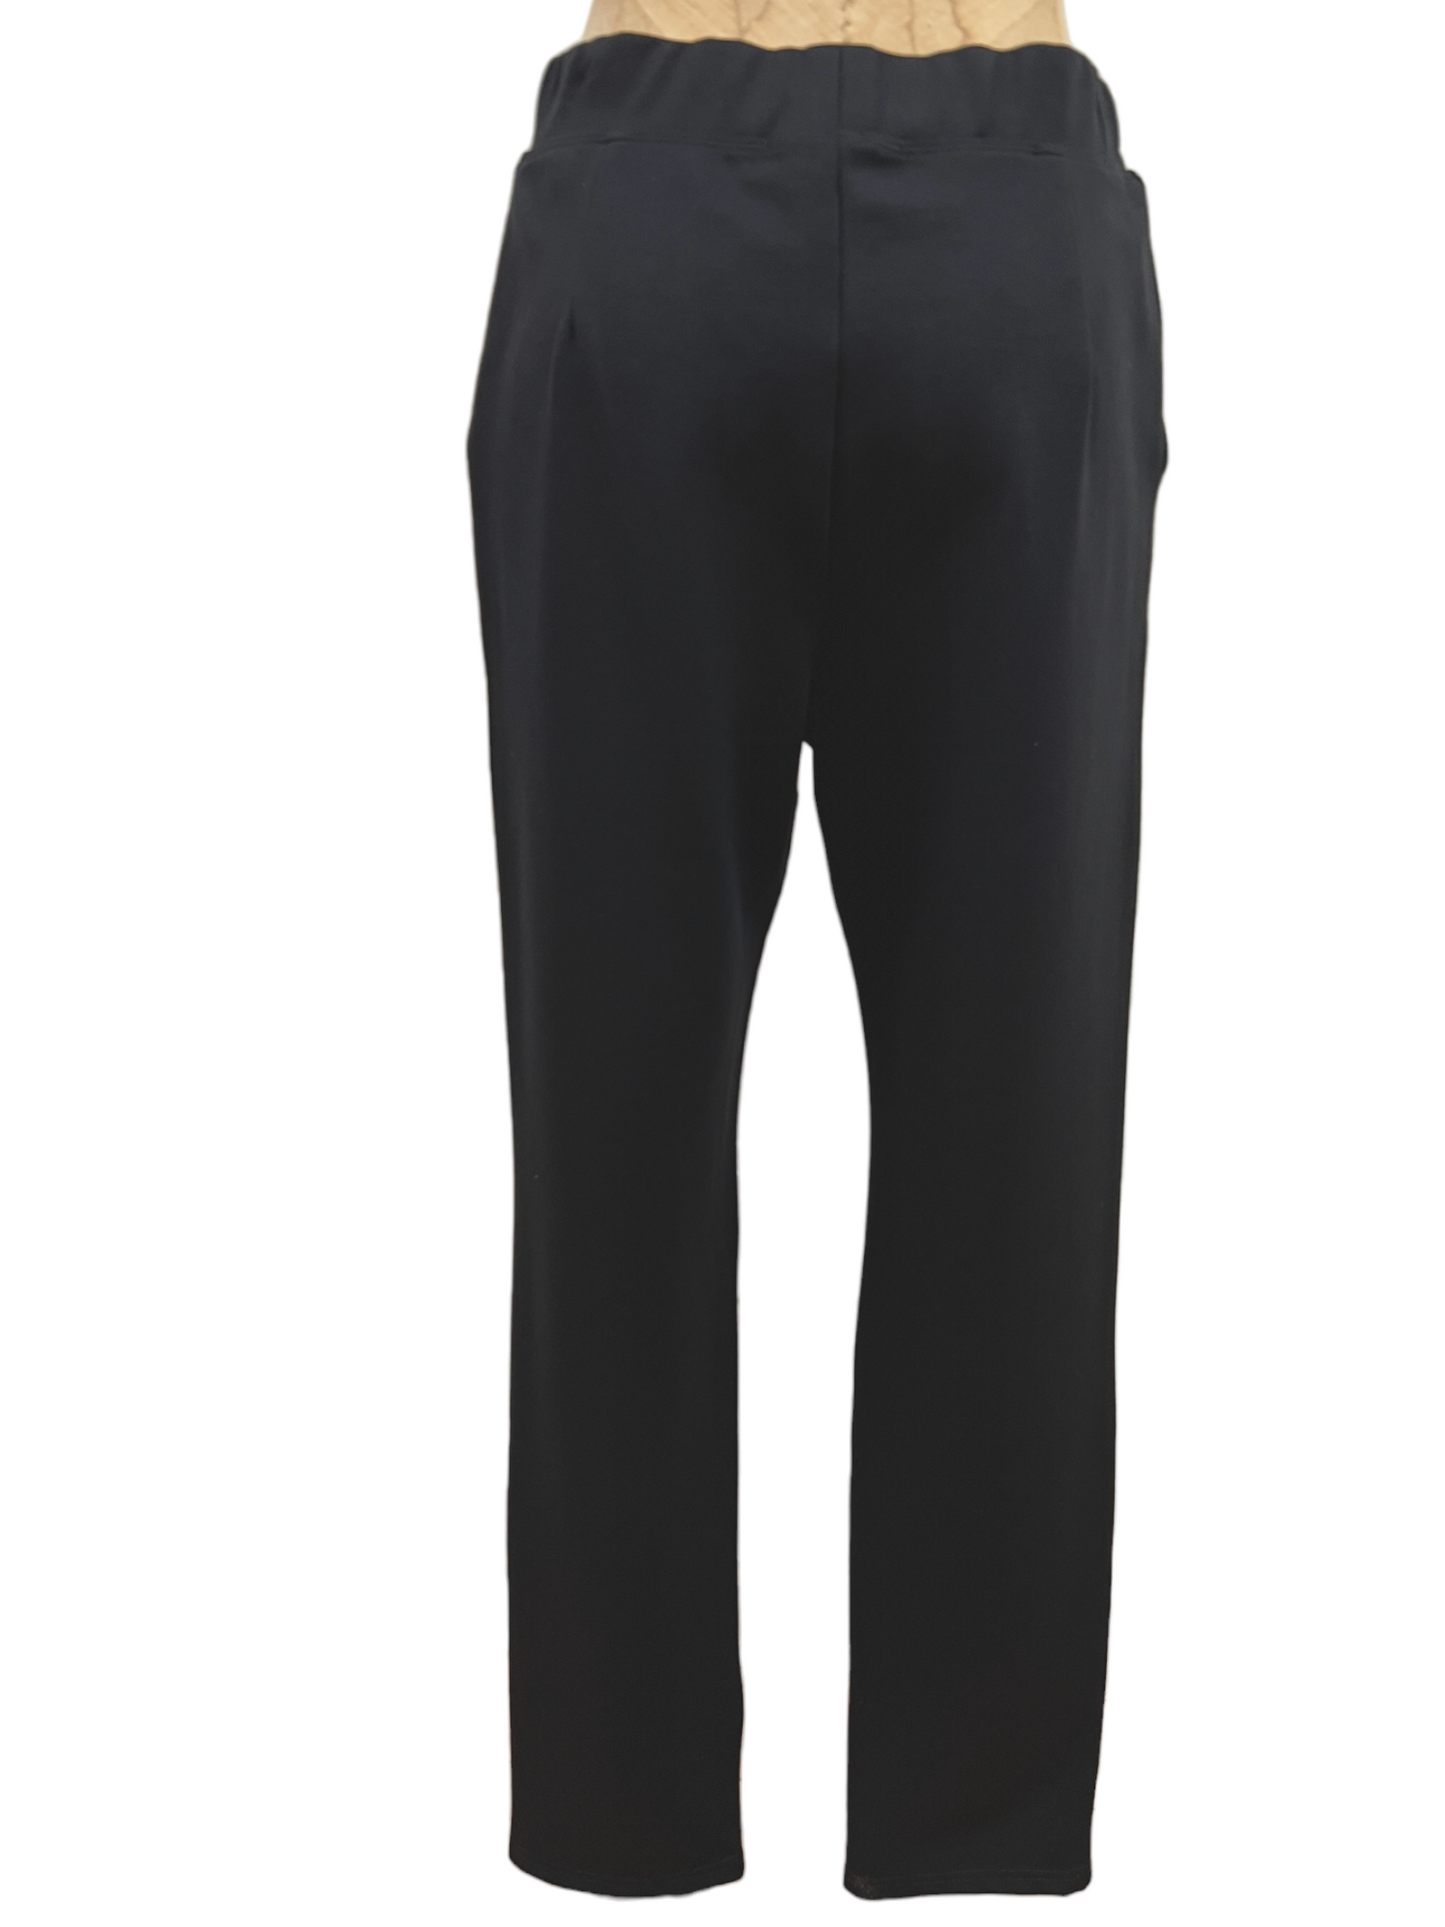 Trudy Pant in Black